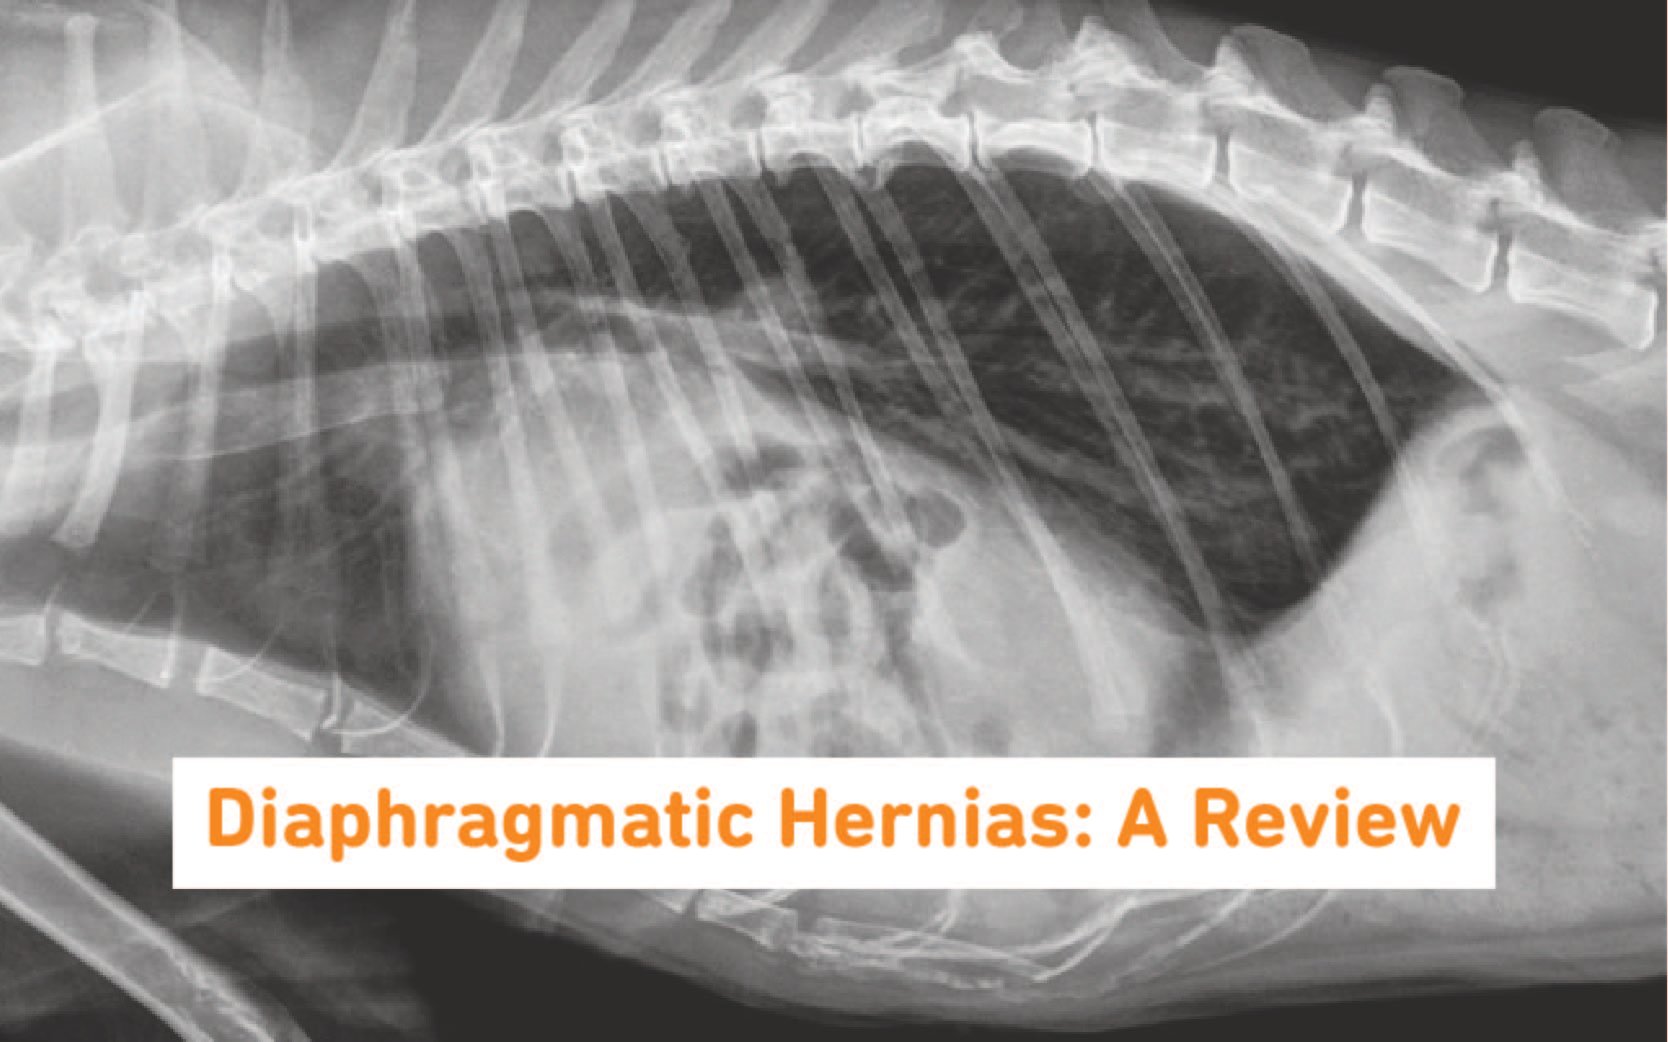 A review of diaphragmatic hernias